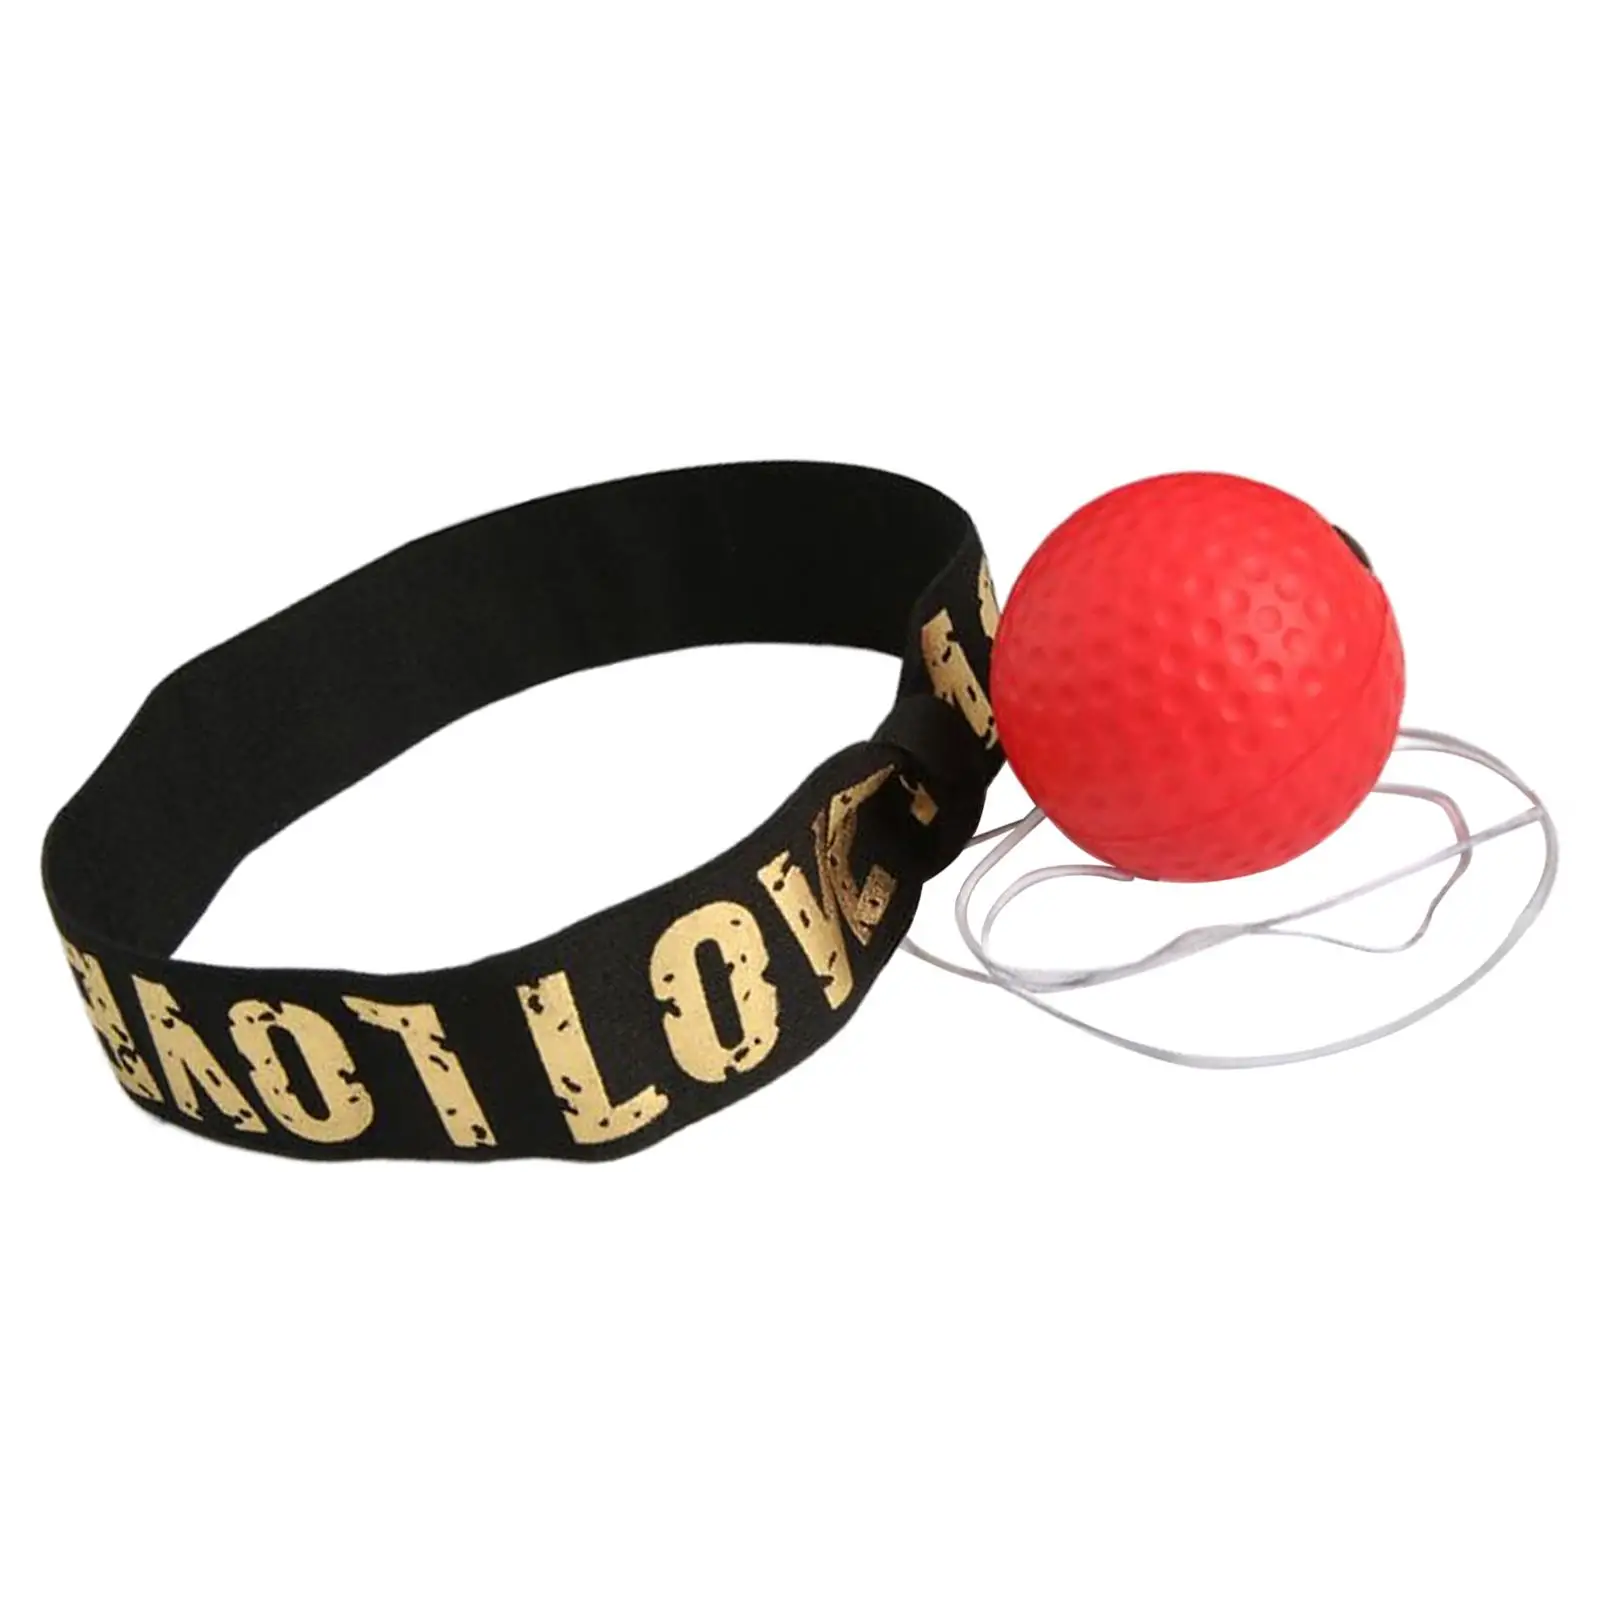 Boxing Reflex Ball Headband Mma Boxing Equipment Punching Bag Exercise Punching Speed Boxing Ball on strings for Fitness Agility